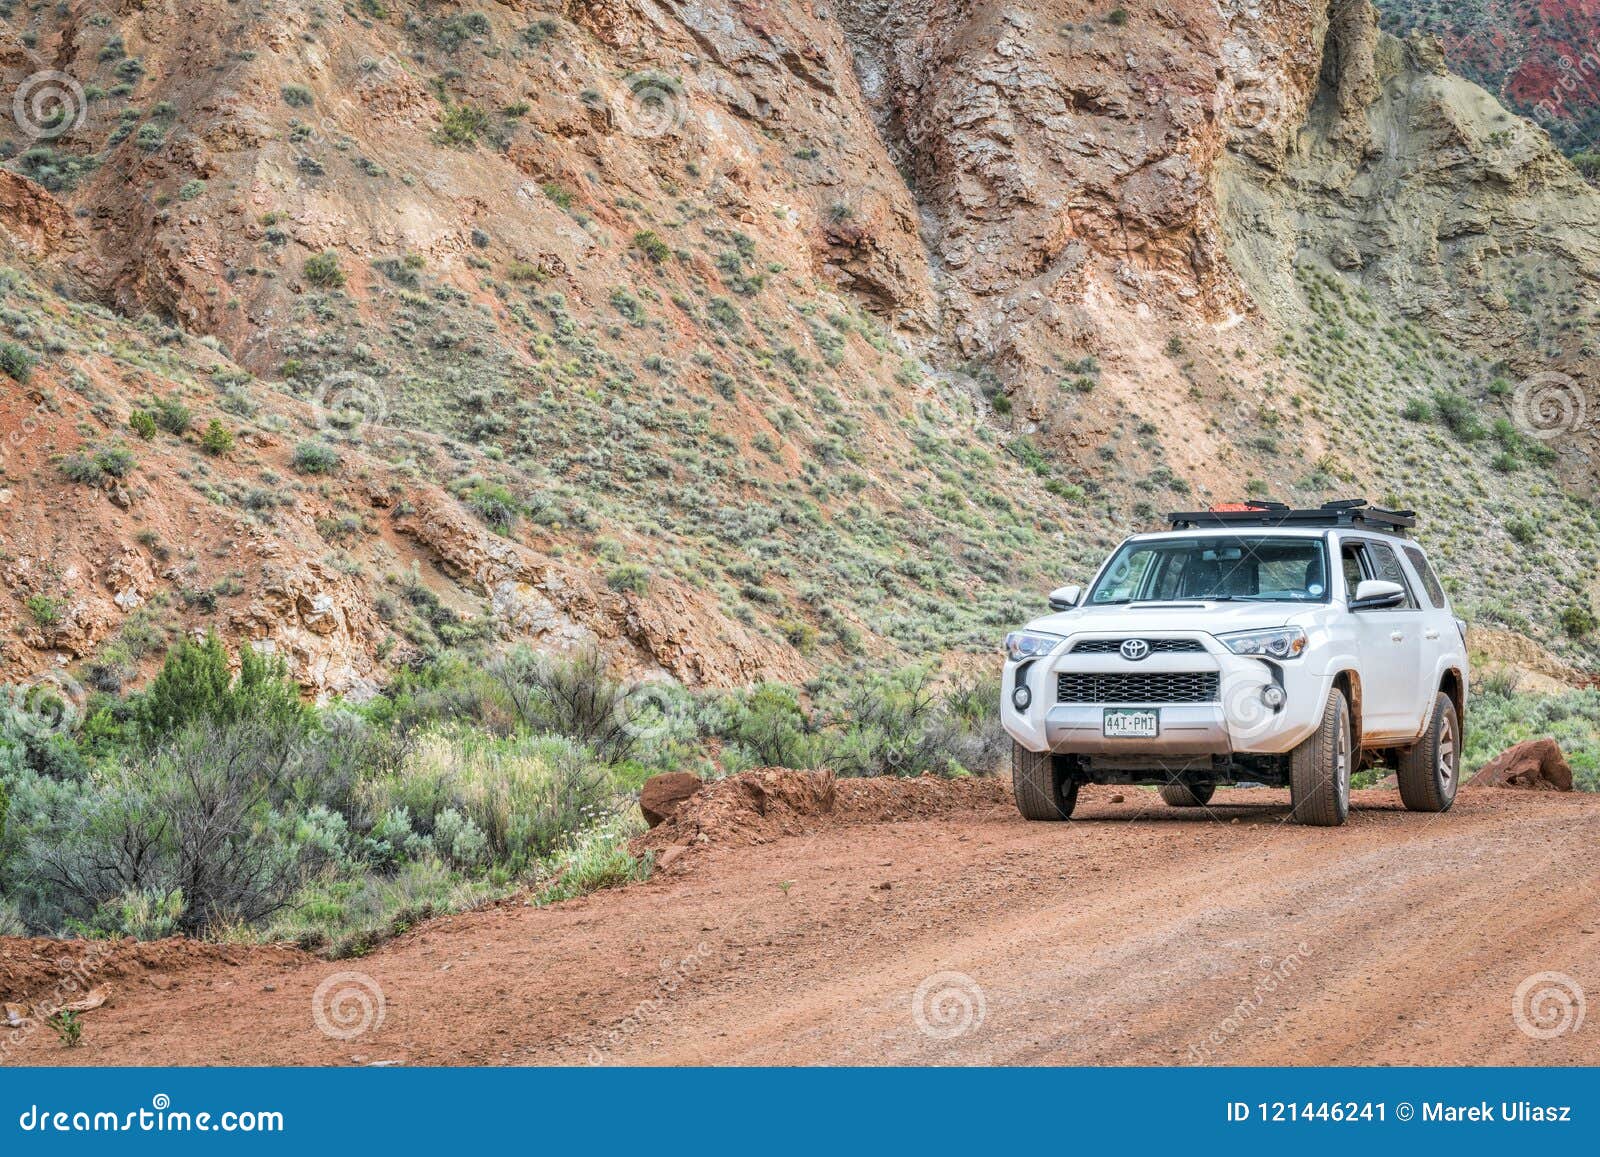 Toyota 4runner Suv On A Desert Trail Editorial Photo Image Of